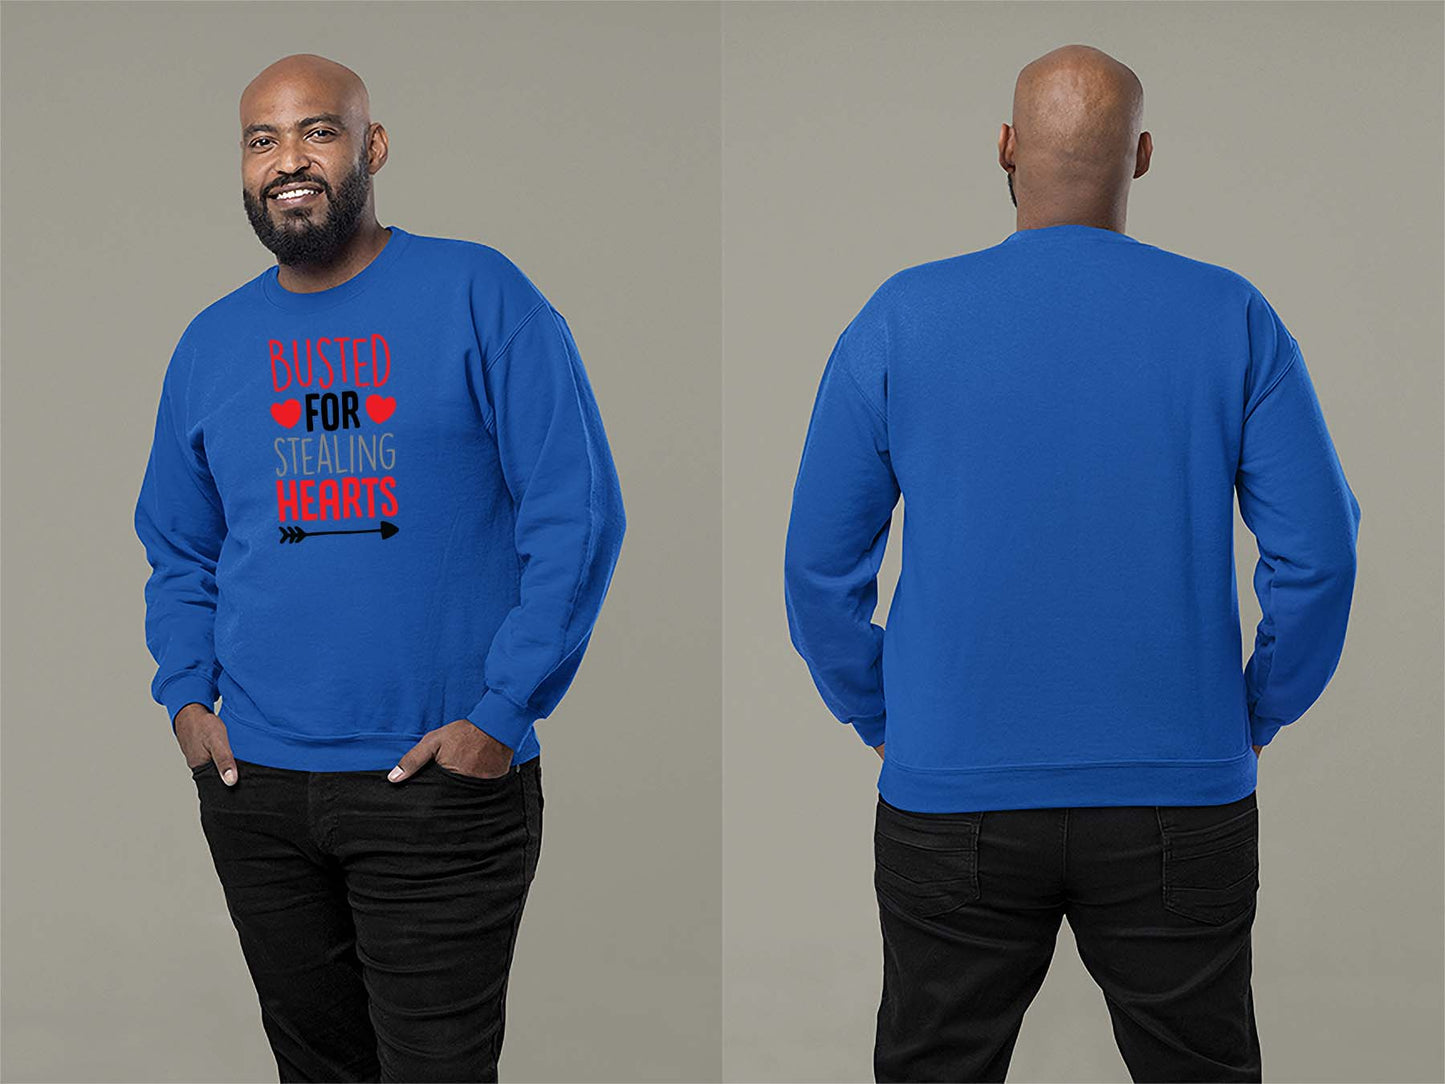 Fat Dave Busted For Stealing Hearts Sweatshirt Small Royal